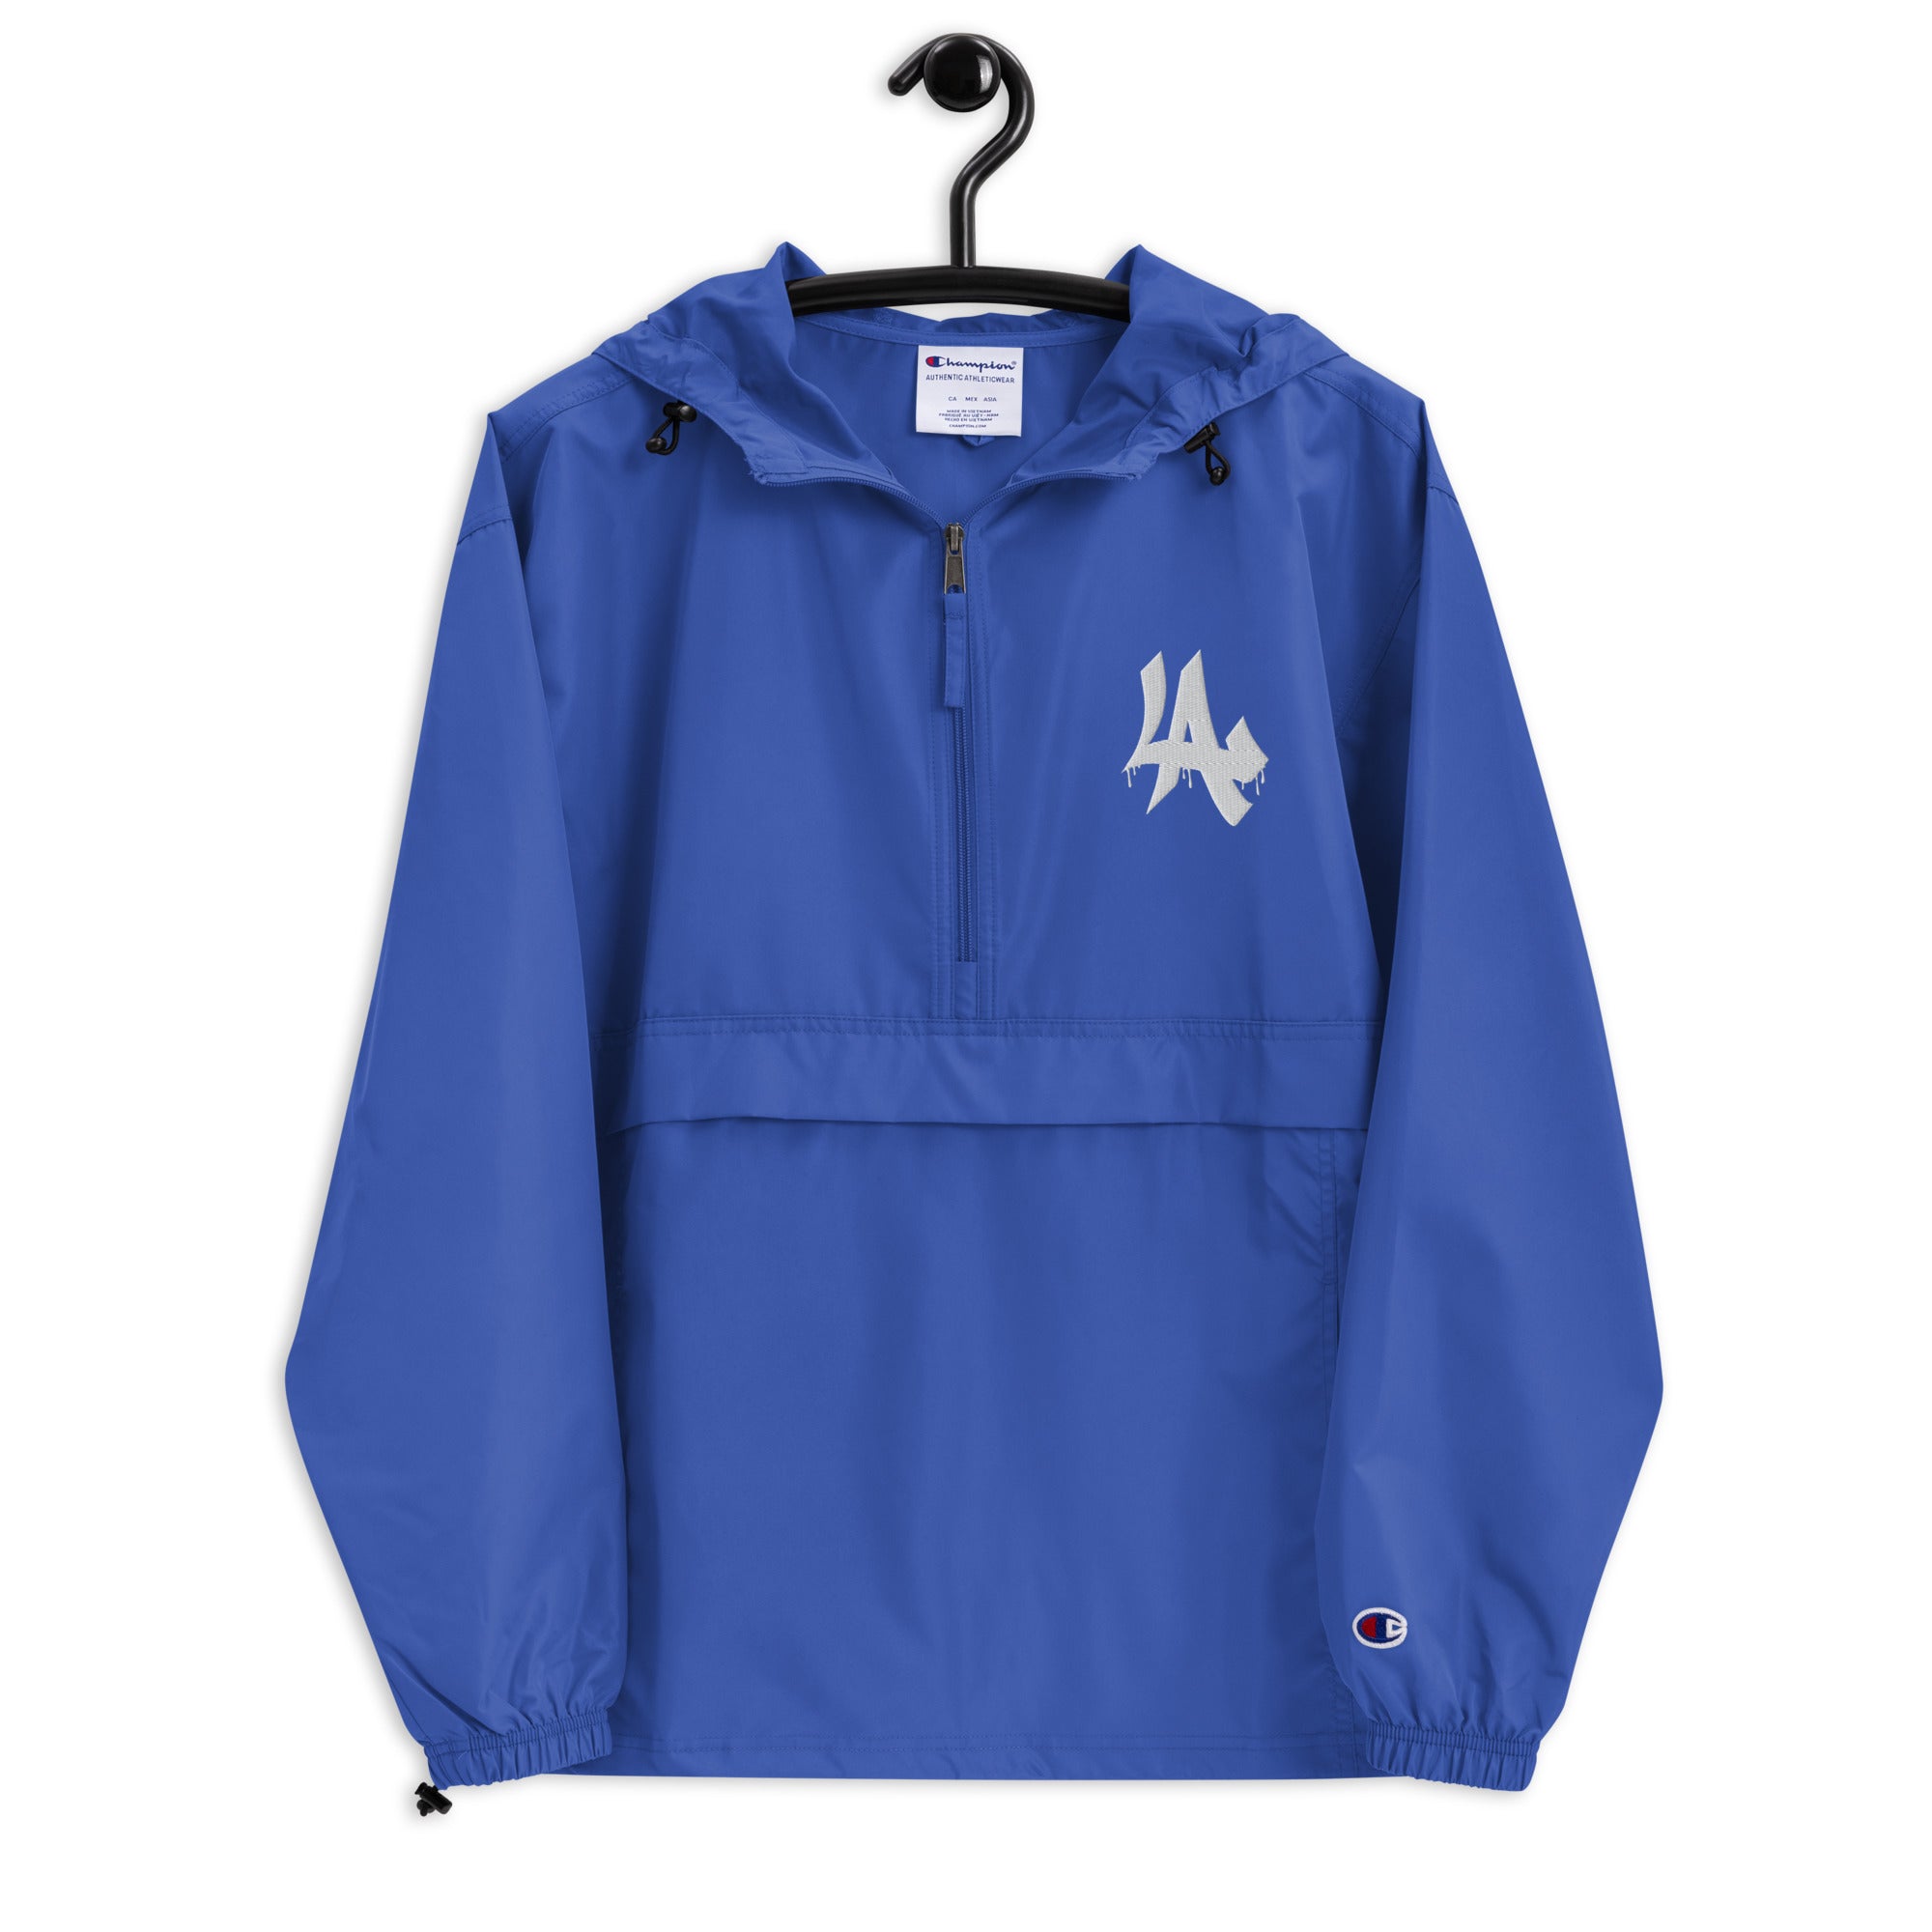 BAC x Champion LA Drips Wind Breaker Jacket – Blessed And Cursed